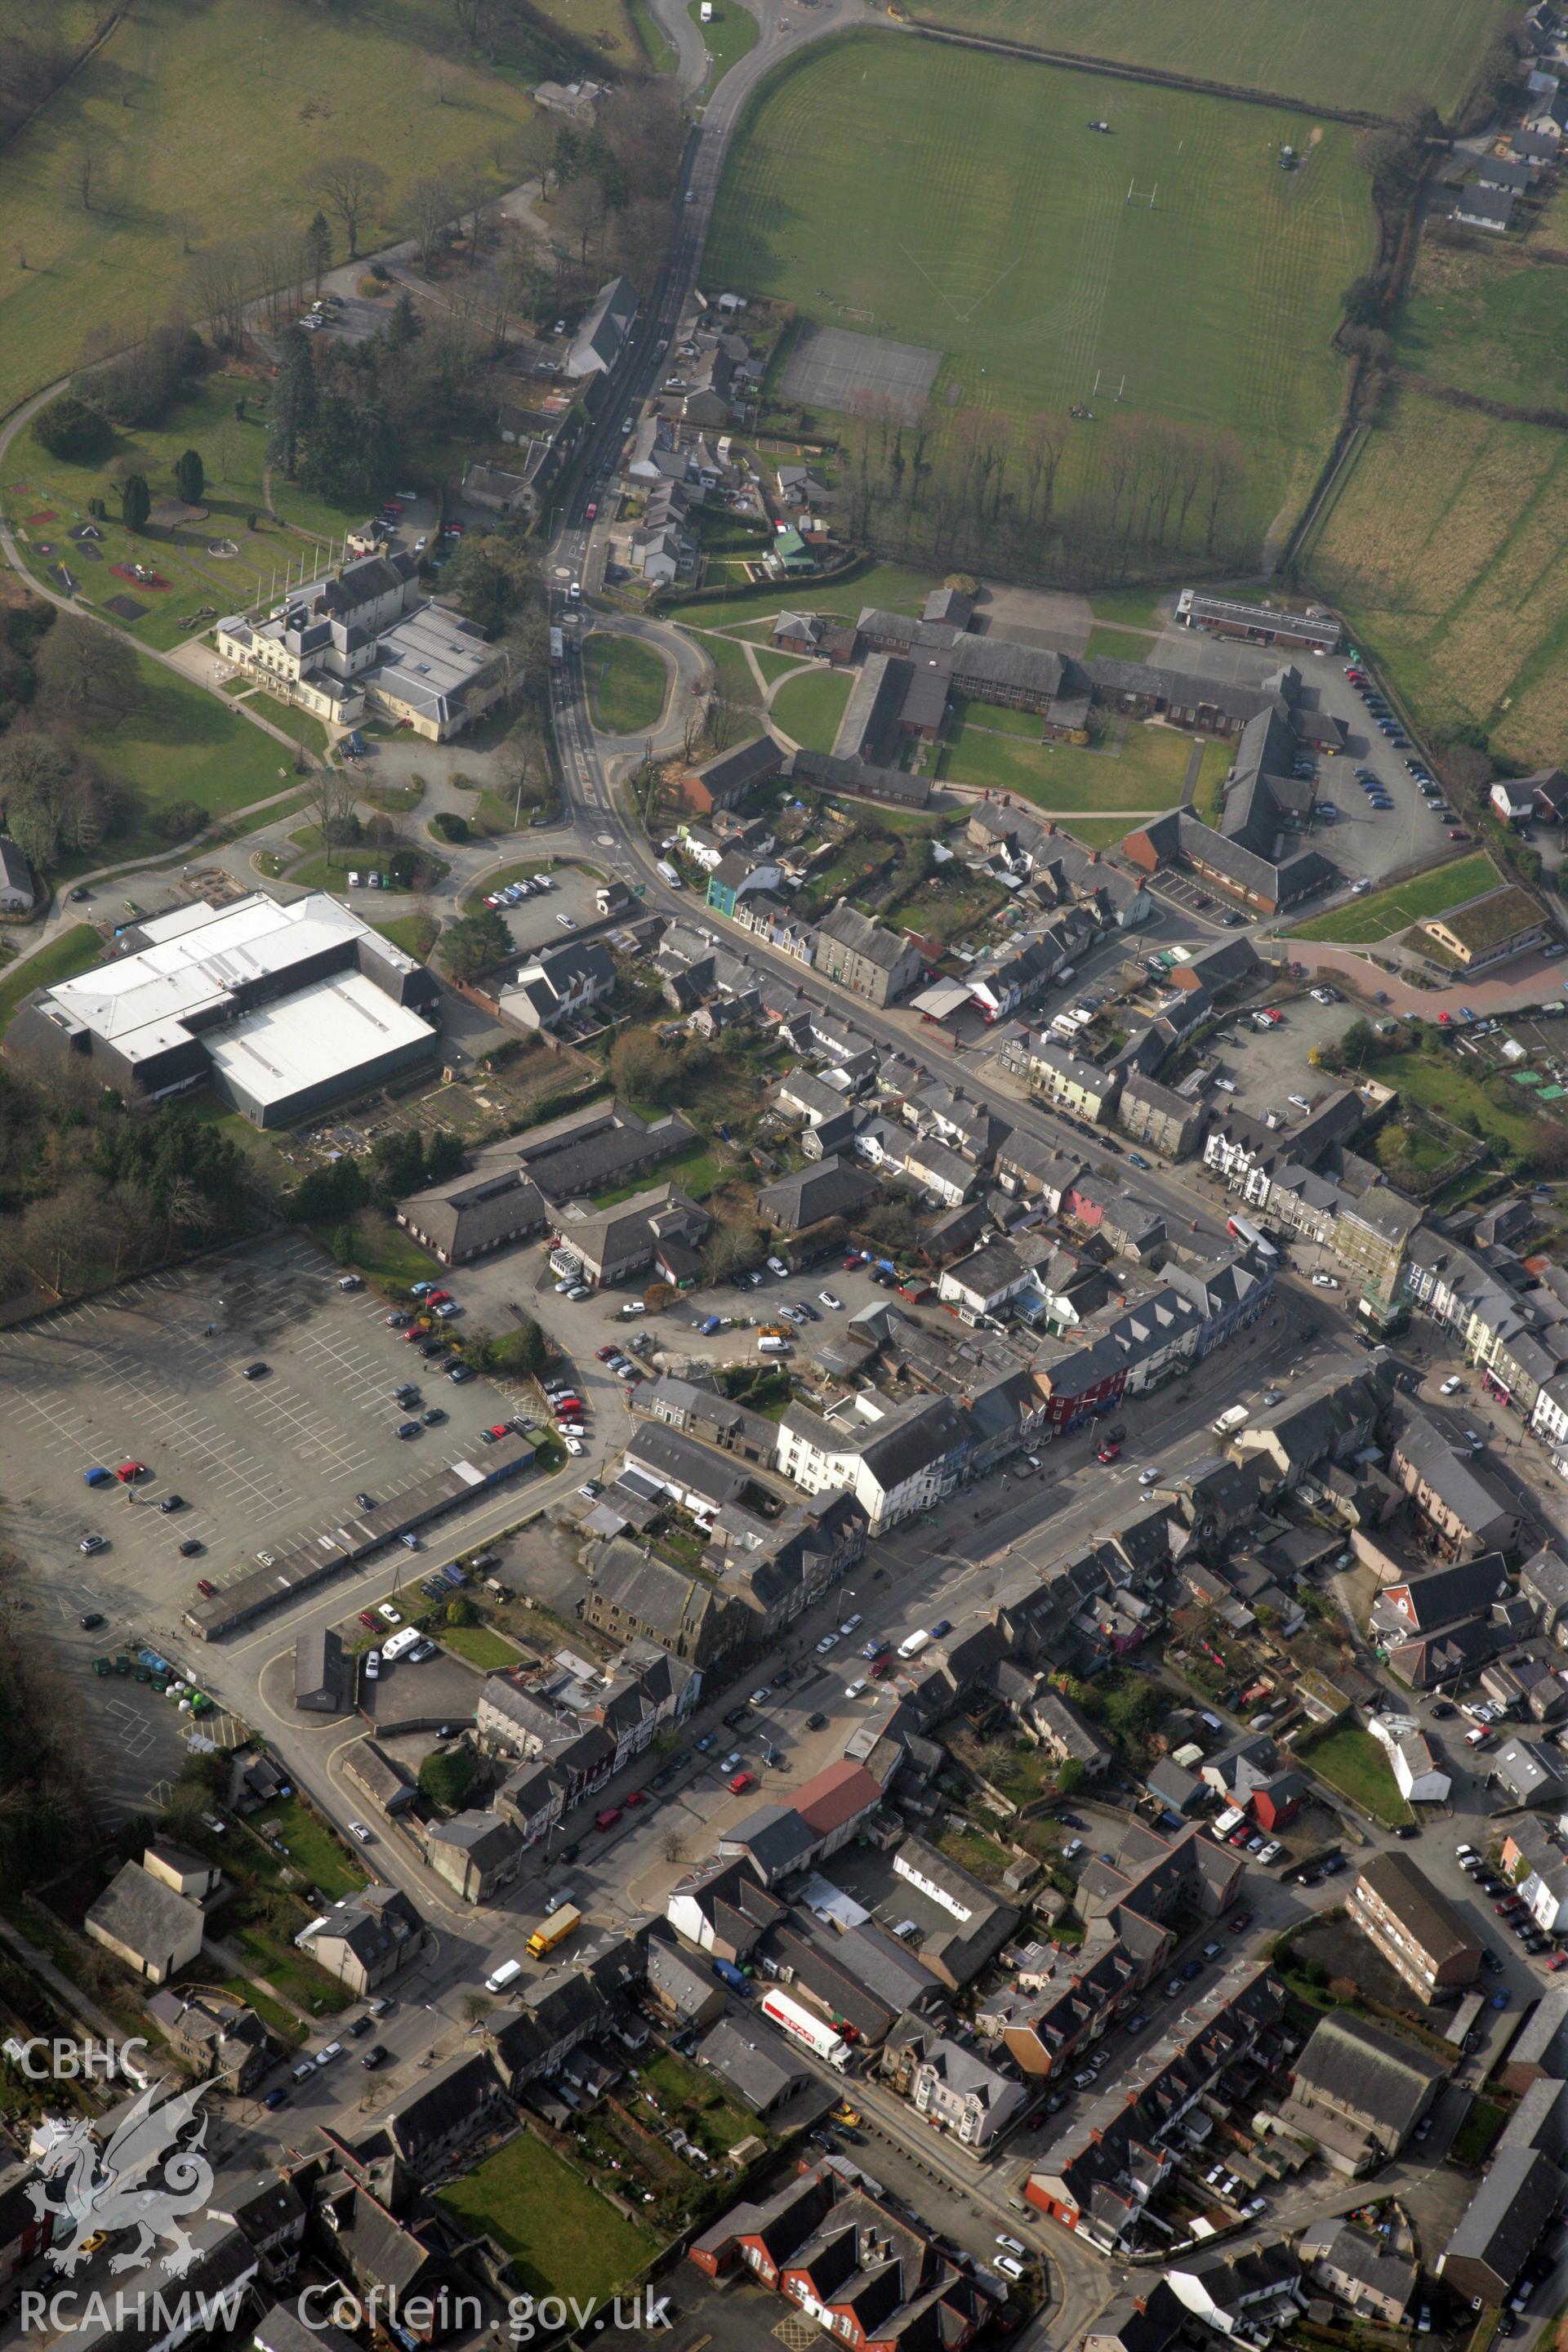 RCAHMW colour oblique photograph of Machynlleth. Taken by Toby Driver on 25/03/2011.